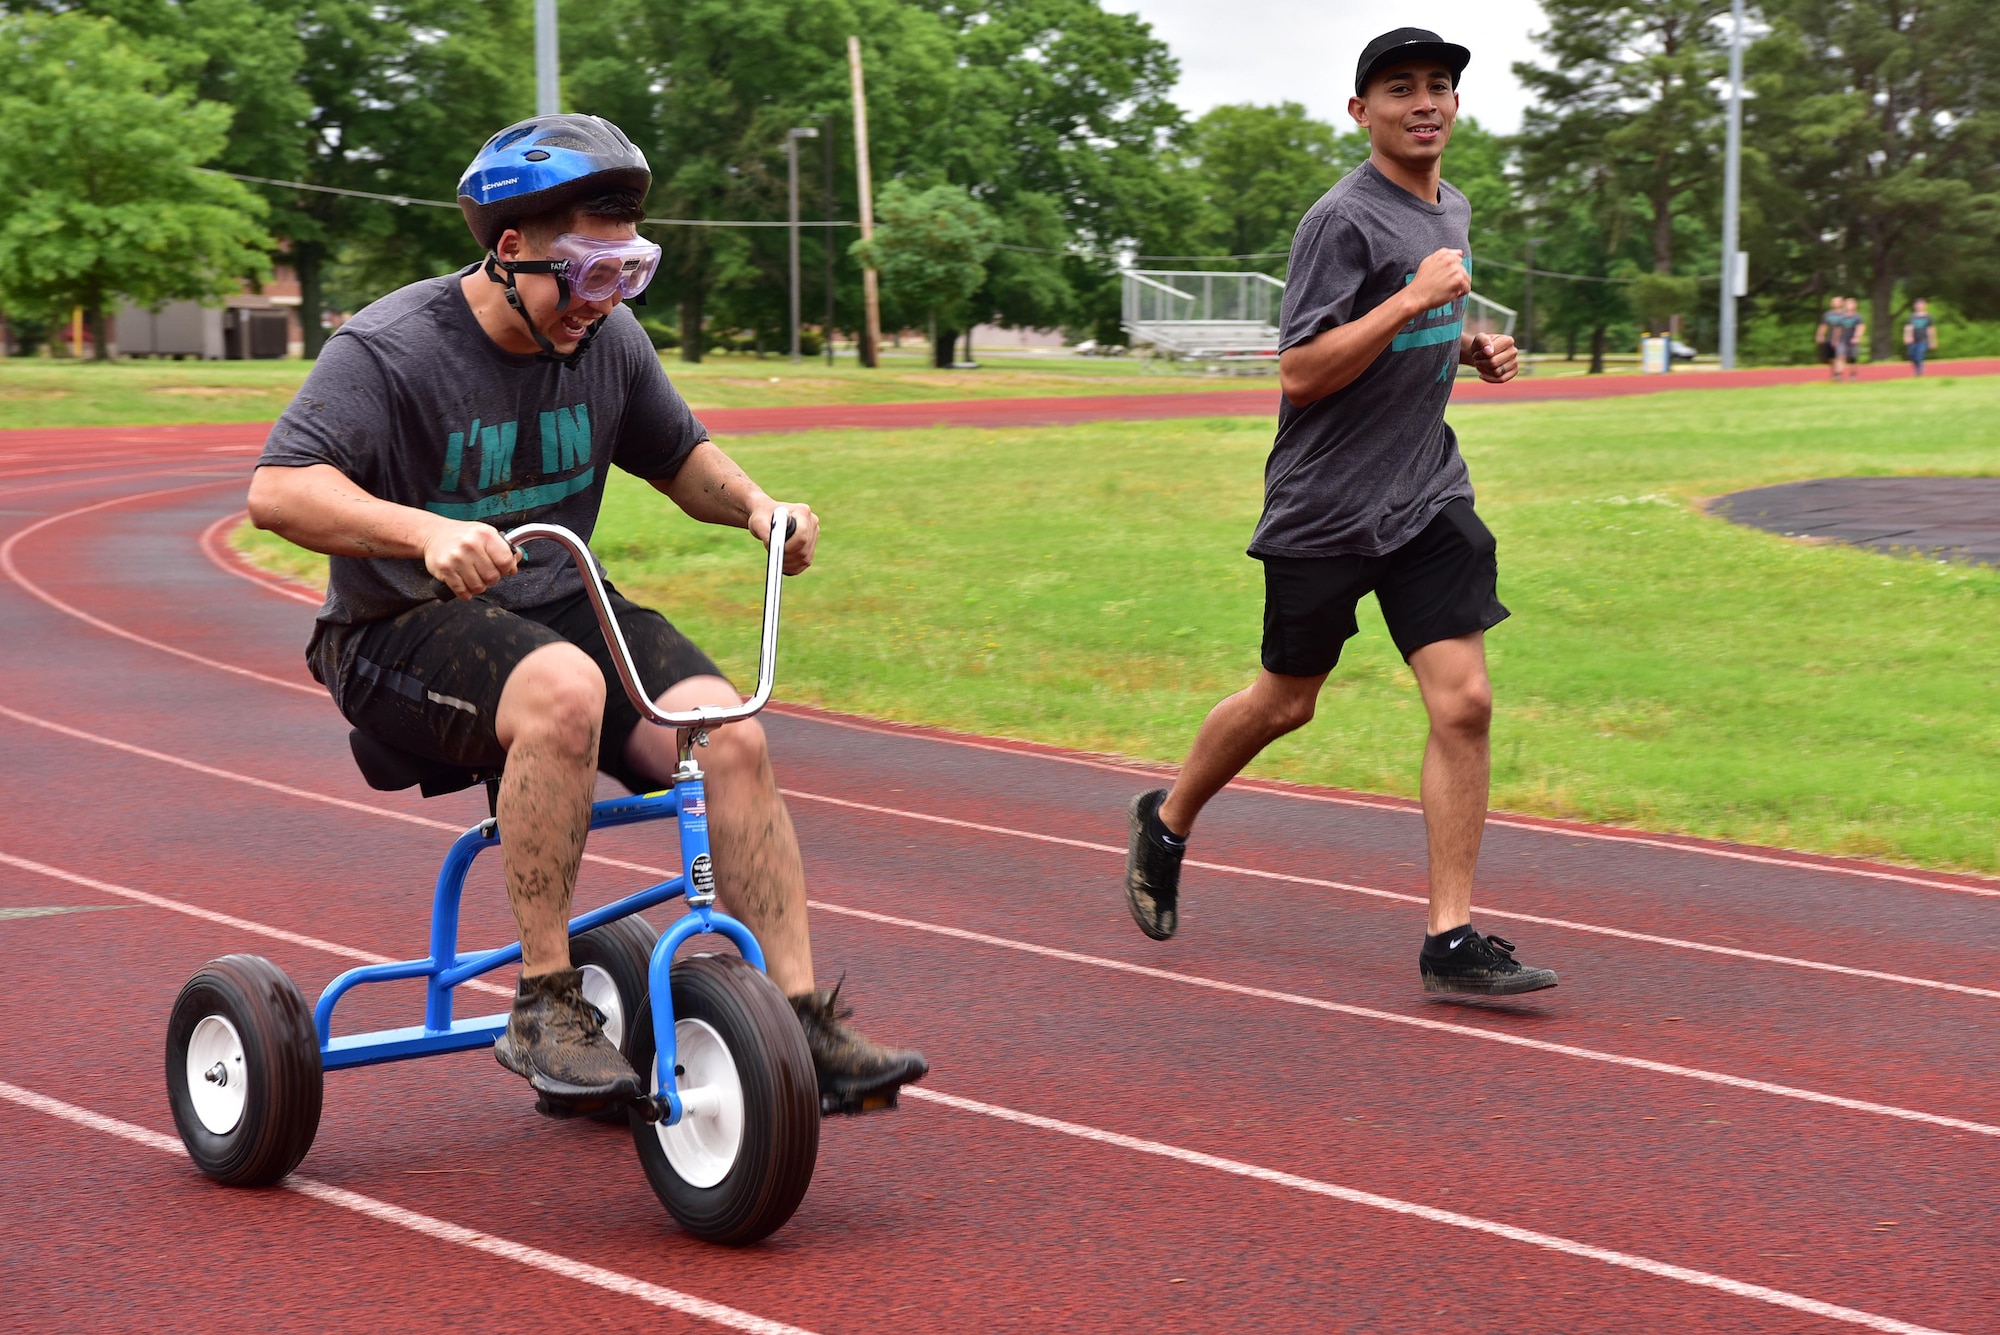 An Airman rides a tricycle during SAPR CLEAR challenge.